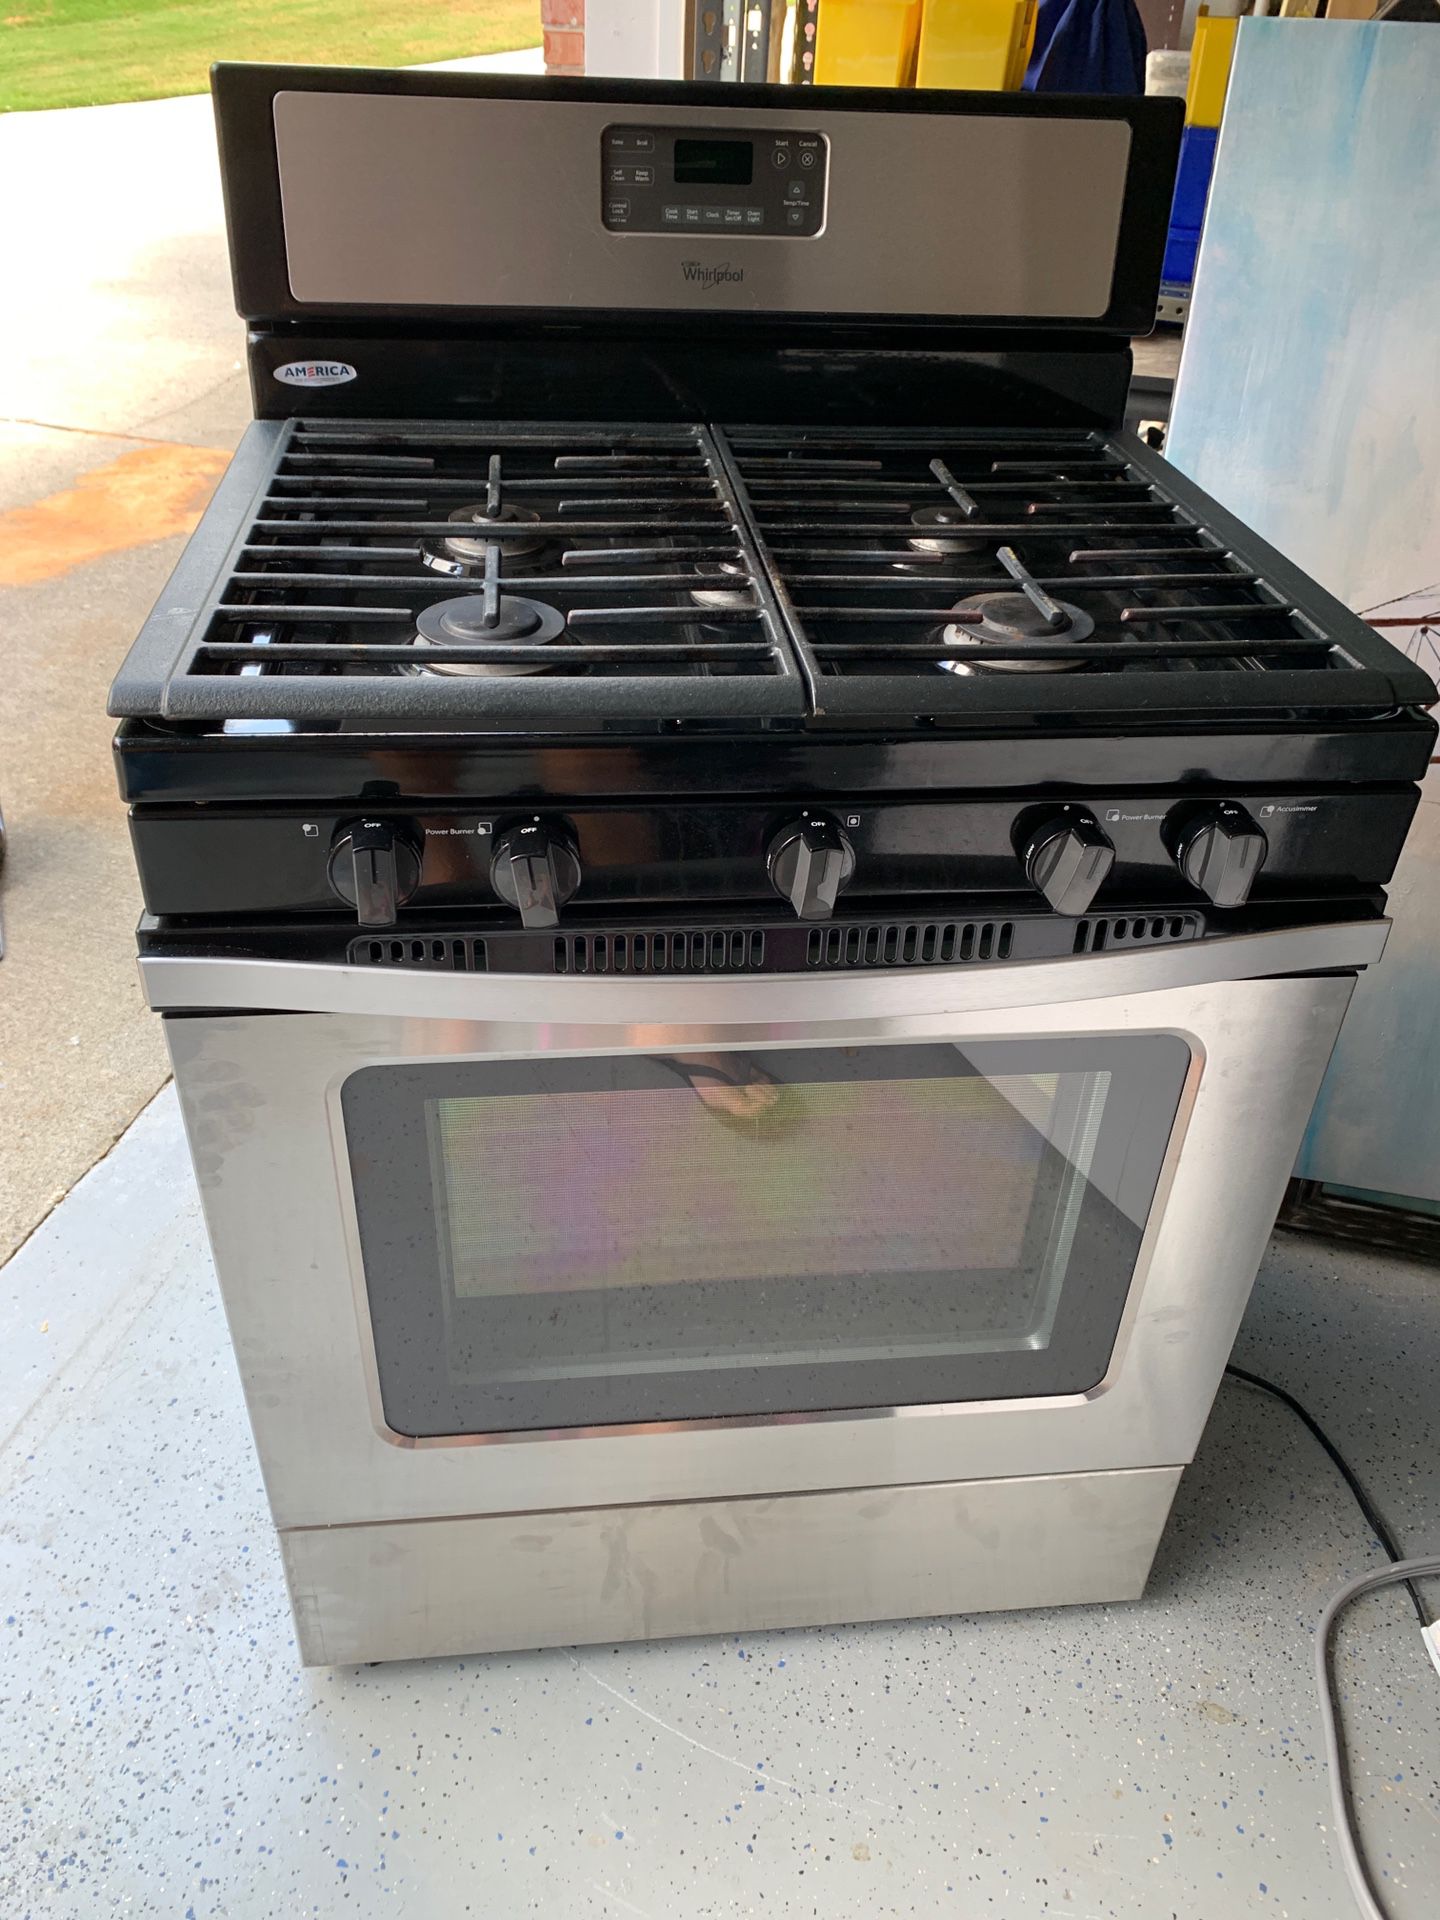 Whirlpool Gas stove/oven